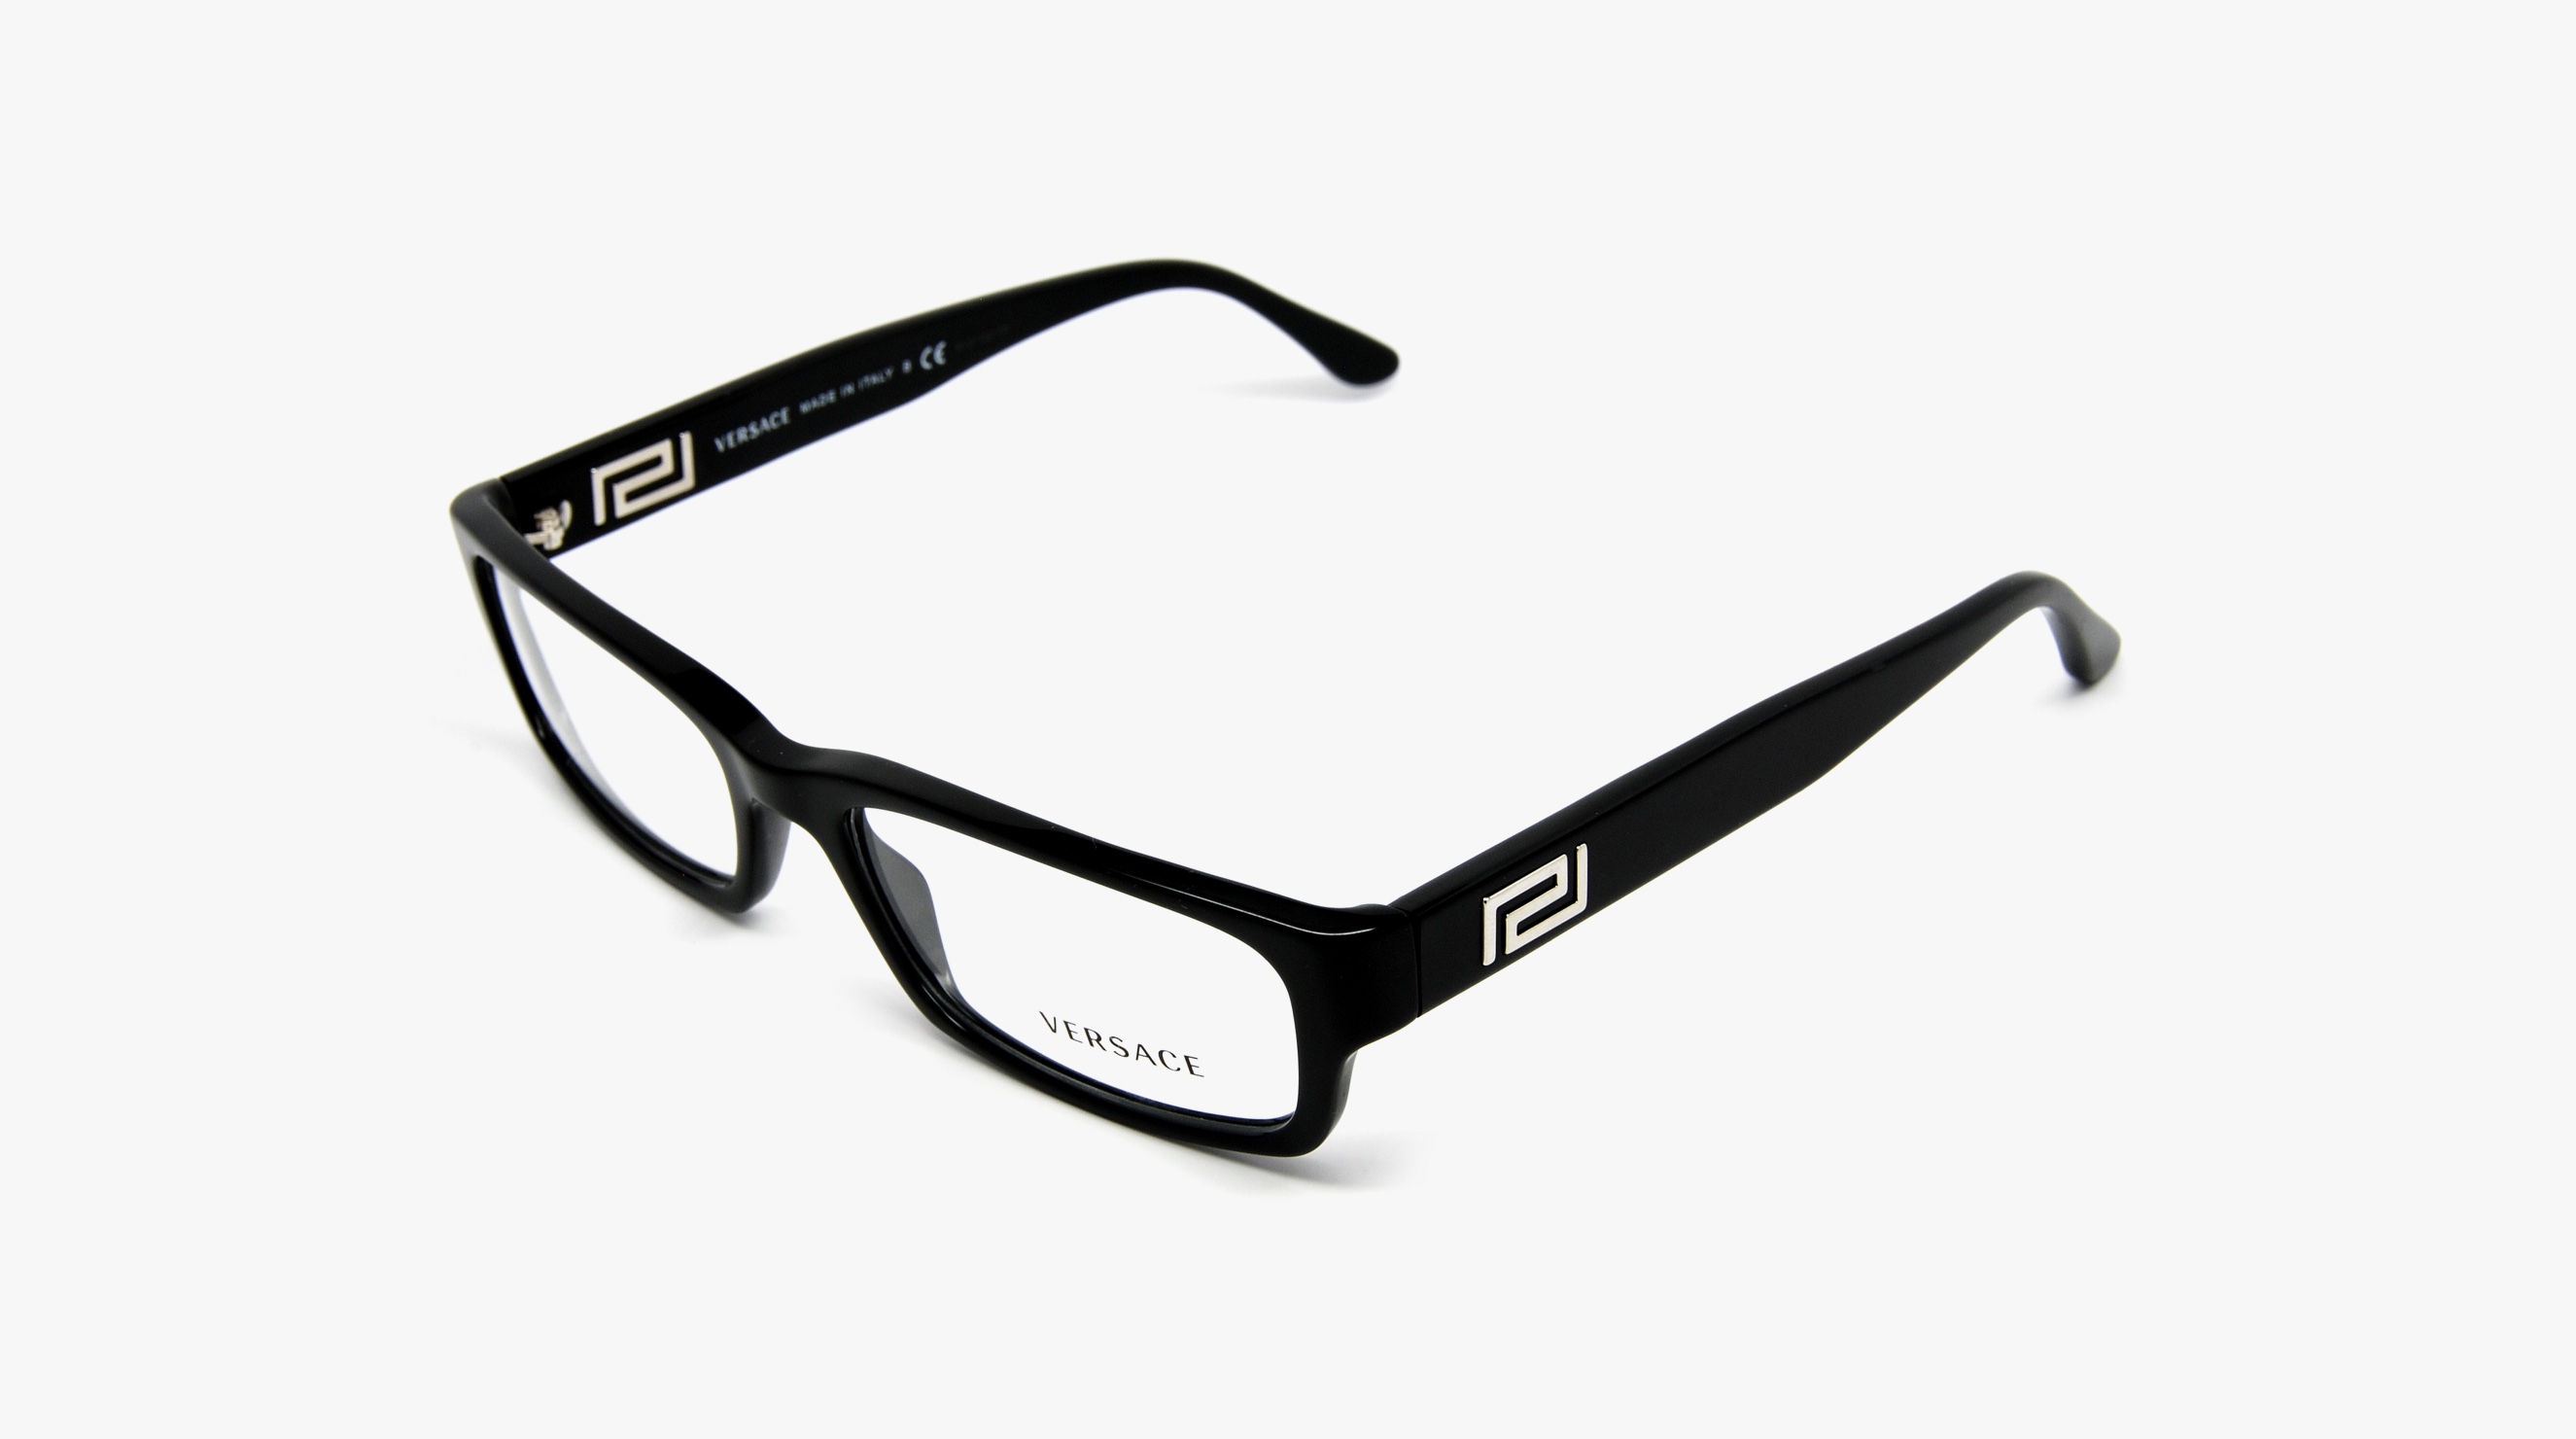 Product Photography of VERSACE glasses for Opti Online